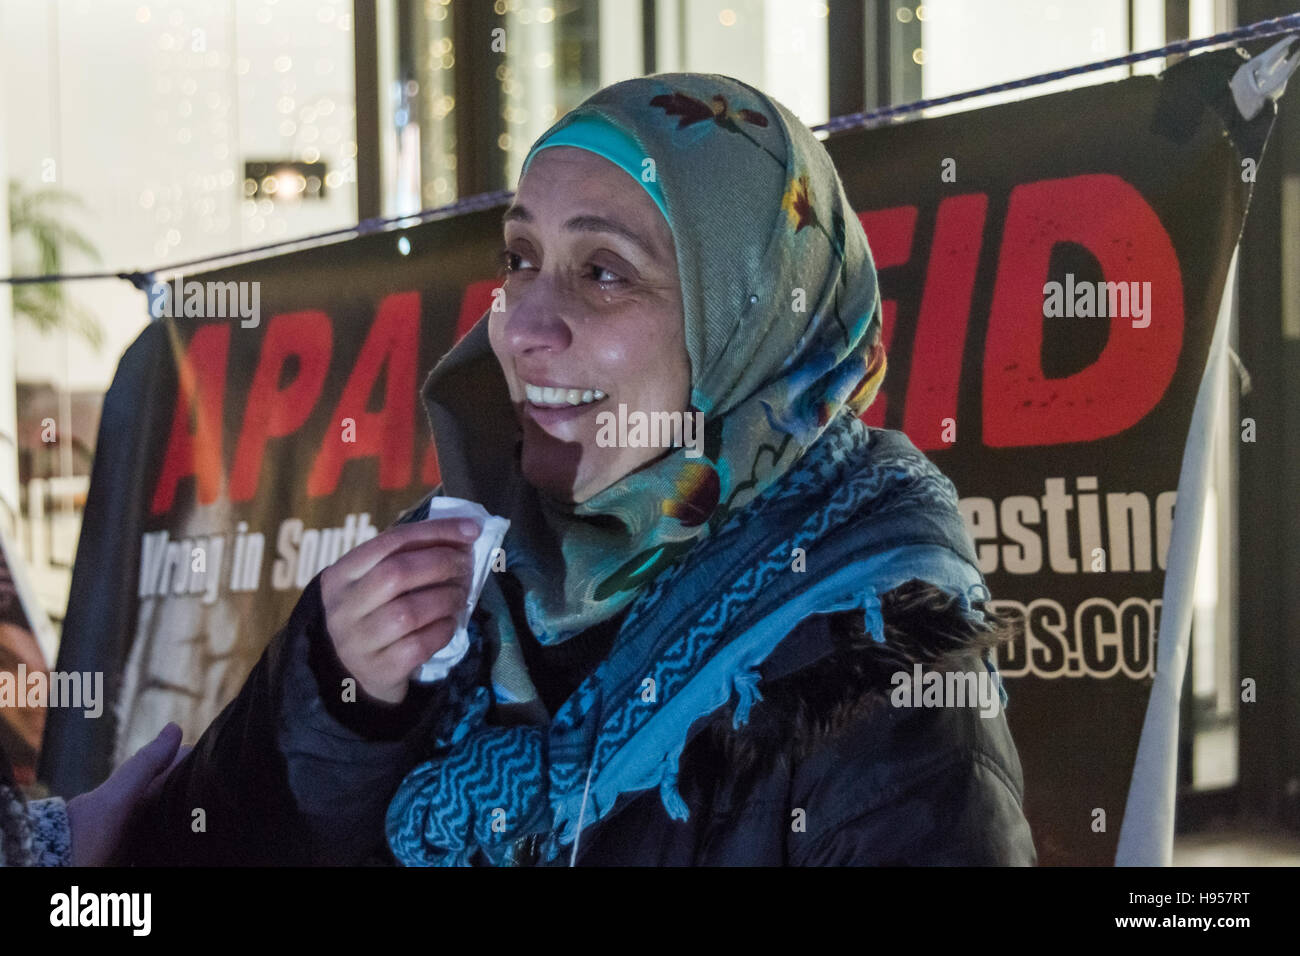 London, UK. 18th November 2016. Laila Sharary, wife of Fayez Shahary, talks about the arrest of her husband at the protest by human rights group Inminds outside the headquarters of British security company G4S over the abduction by Israel and subsequent torture of British national and father of five Fayez Sharary. Arrested by Israeli forces  on 15 September when leaving the West Bank for Jordan with his wife and youngest child to fly home after a family visit he was tortured for 3 weeks by Israeli secret police to force a confession An Israeli judge declared this worthless and inadmissible and Stock Photo